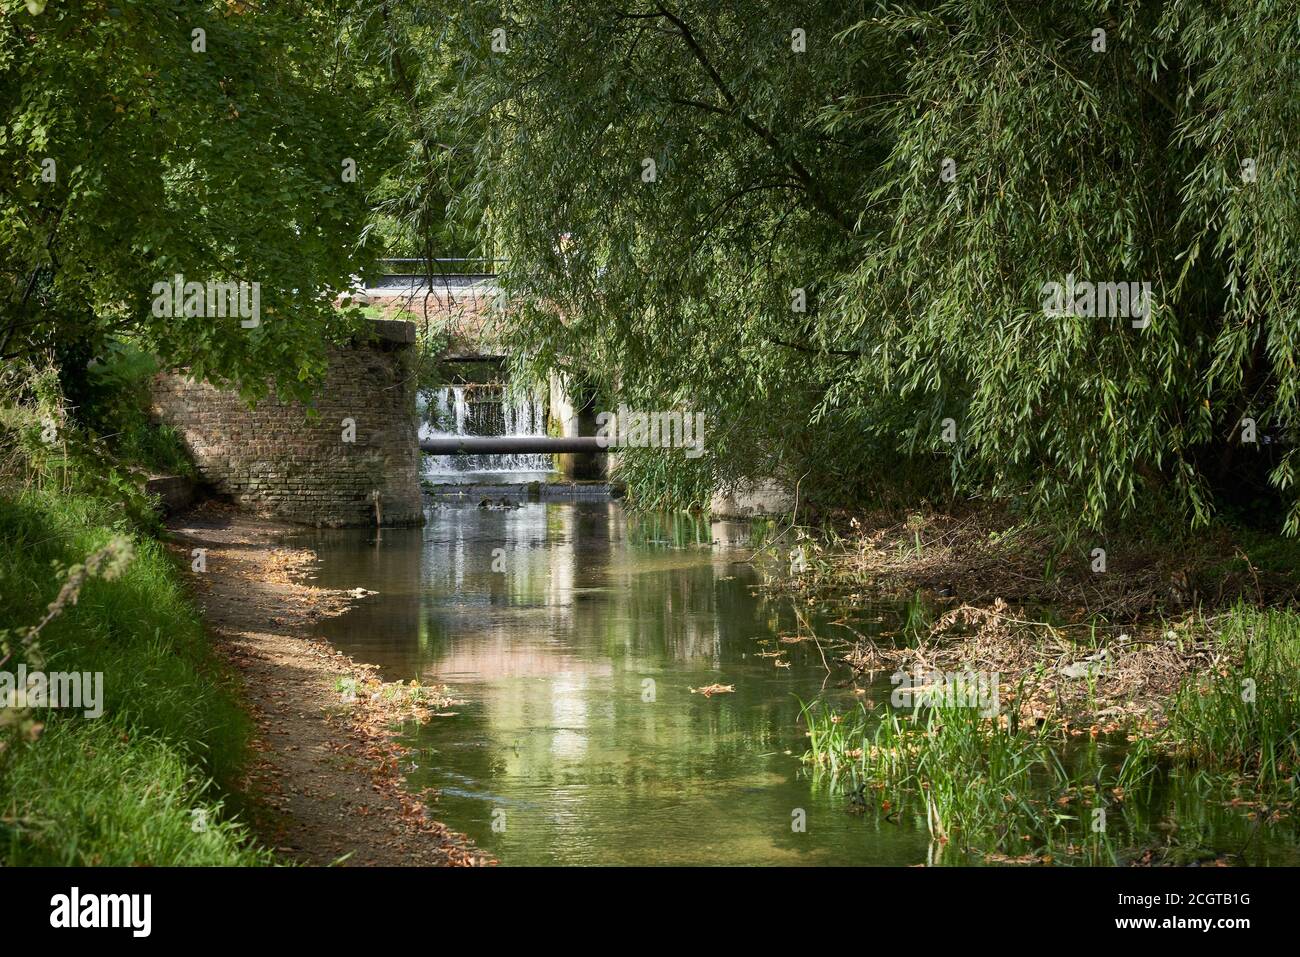 The bridge at Cogglesford mill Sleaford Lincolnshire seen from the River Slea in late summer with a variety of overhanging trees Stock Photo